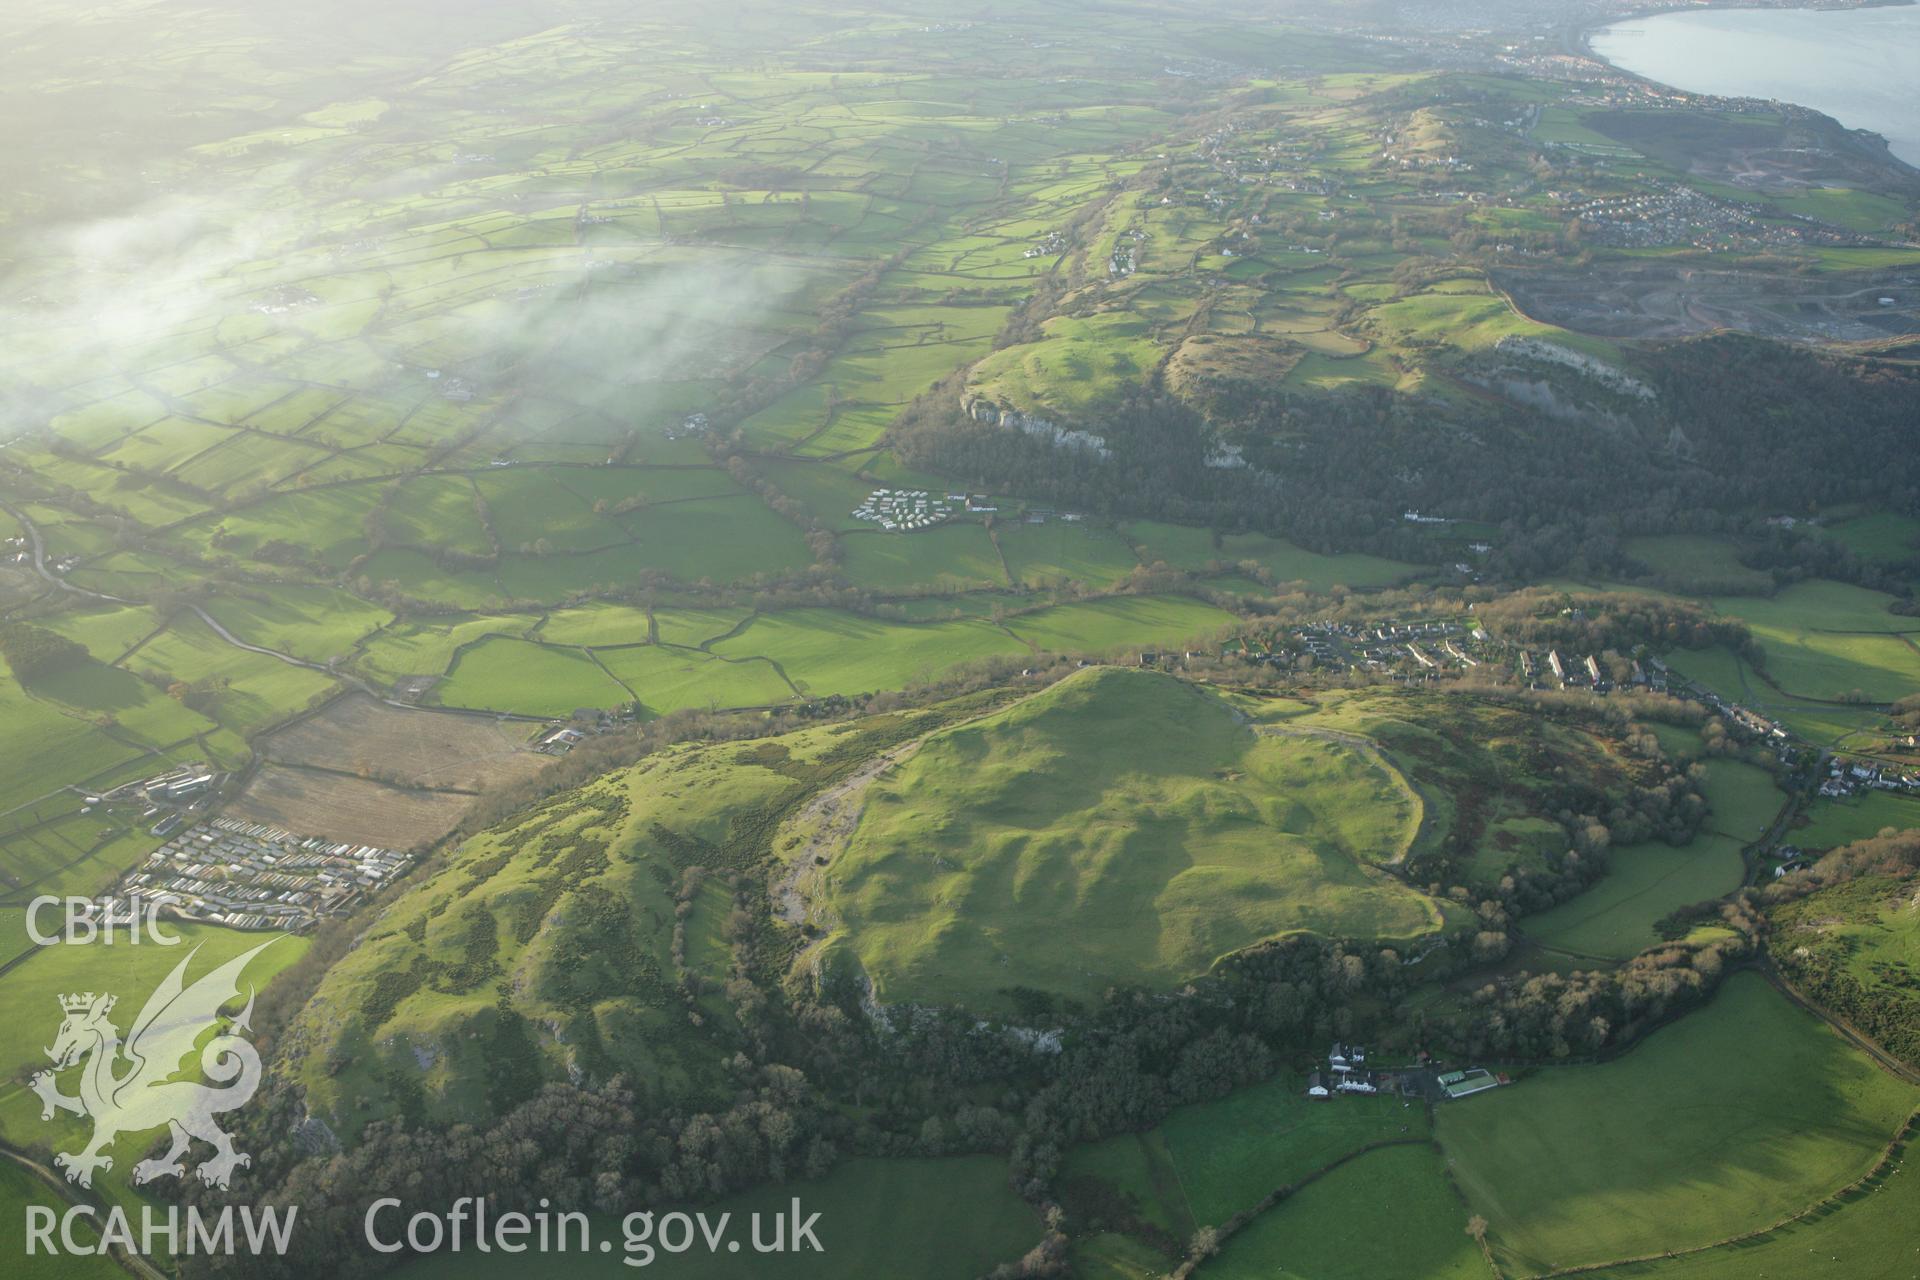 RCAHMW colour oblique aerial photograph of Pen-y-Corddyn-Mawr, Abergele. Taken on 10 December 2009 by Toby Driver